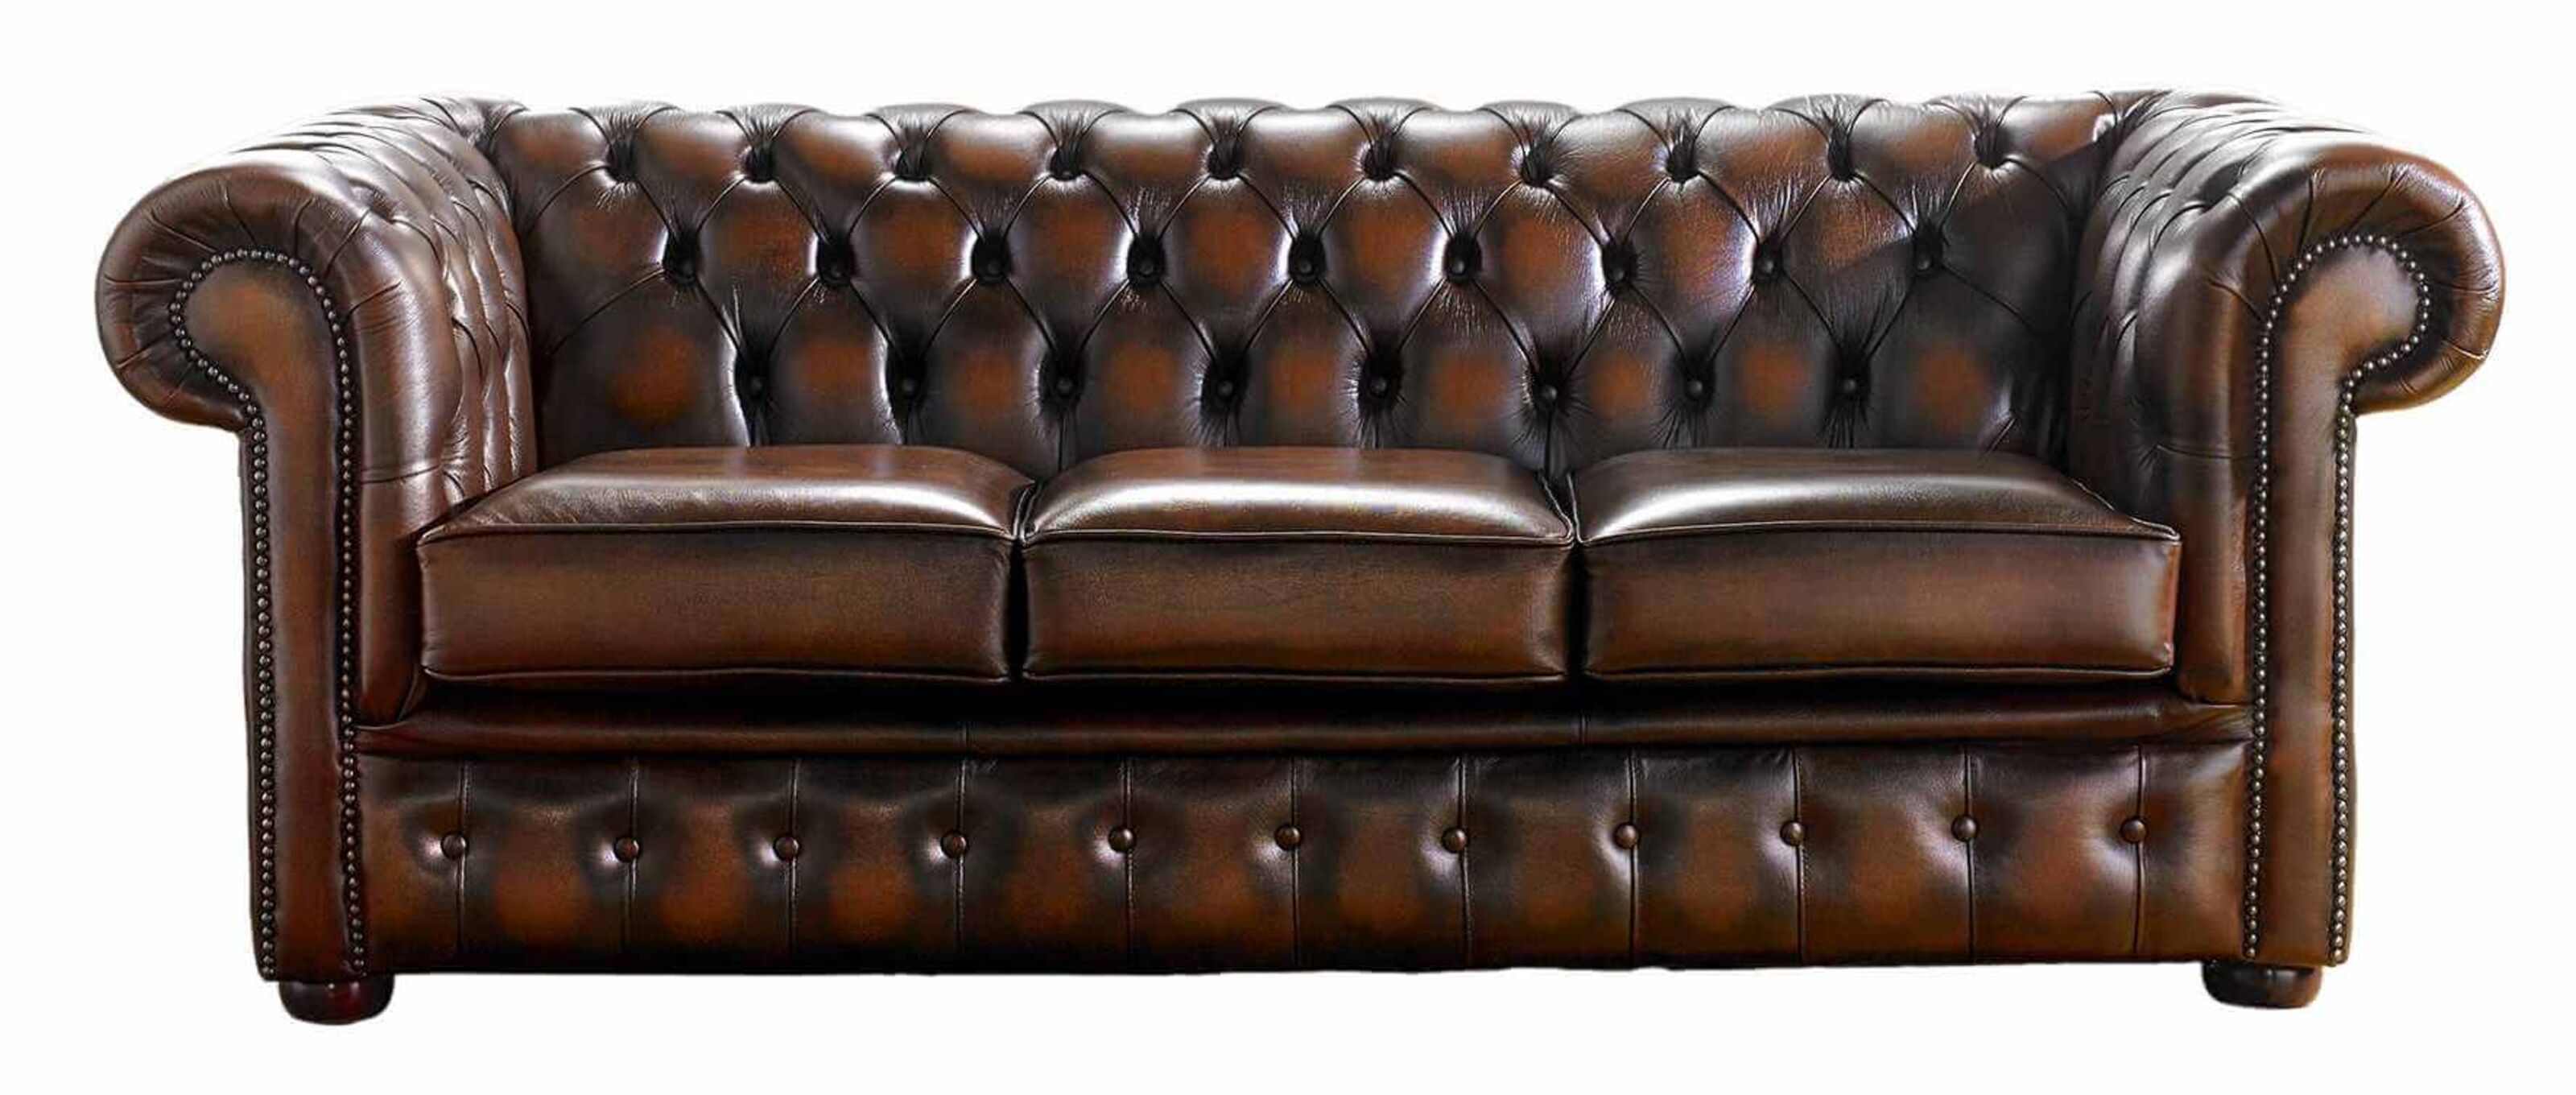 The Luxury Equation Unraveling the Factors Behind the High Price of Chesterfield Sofas  %Post Title